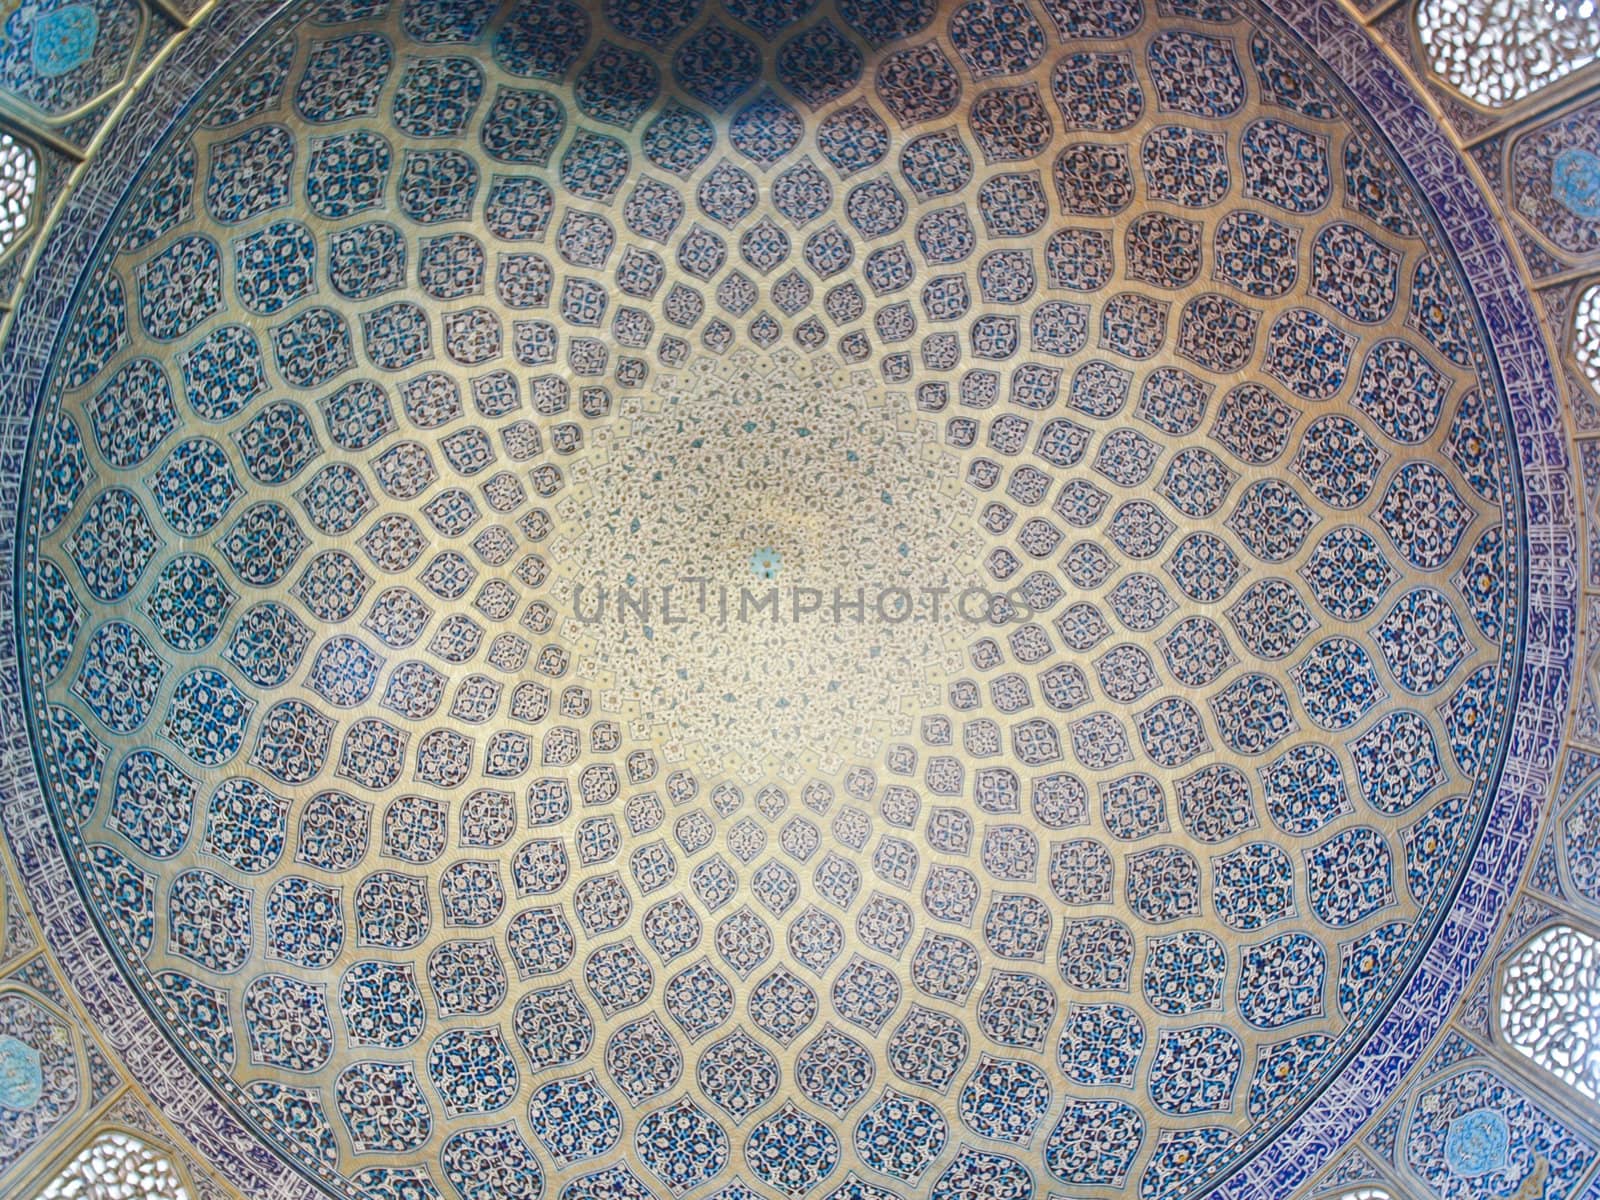 Dome of the mosque, oriental ornaments from Sheikh Loft Allah Mo by gururugu